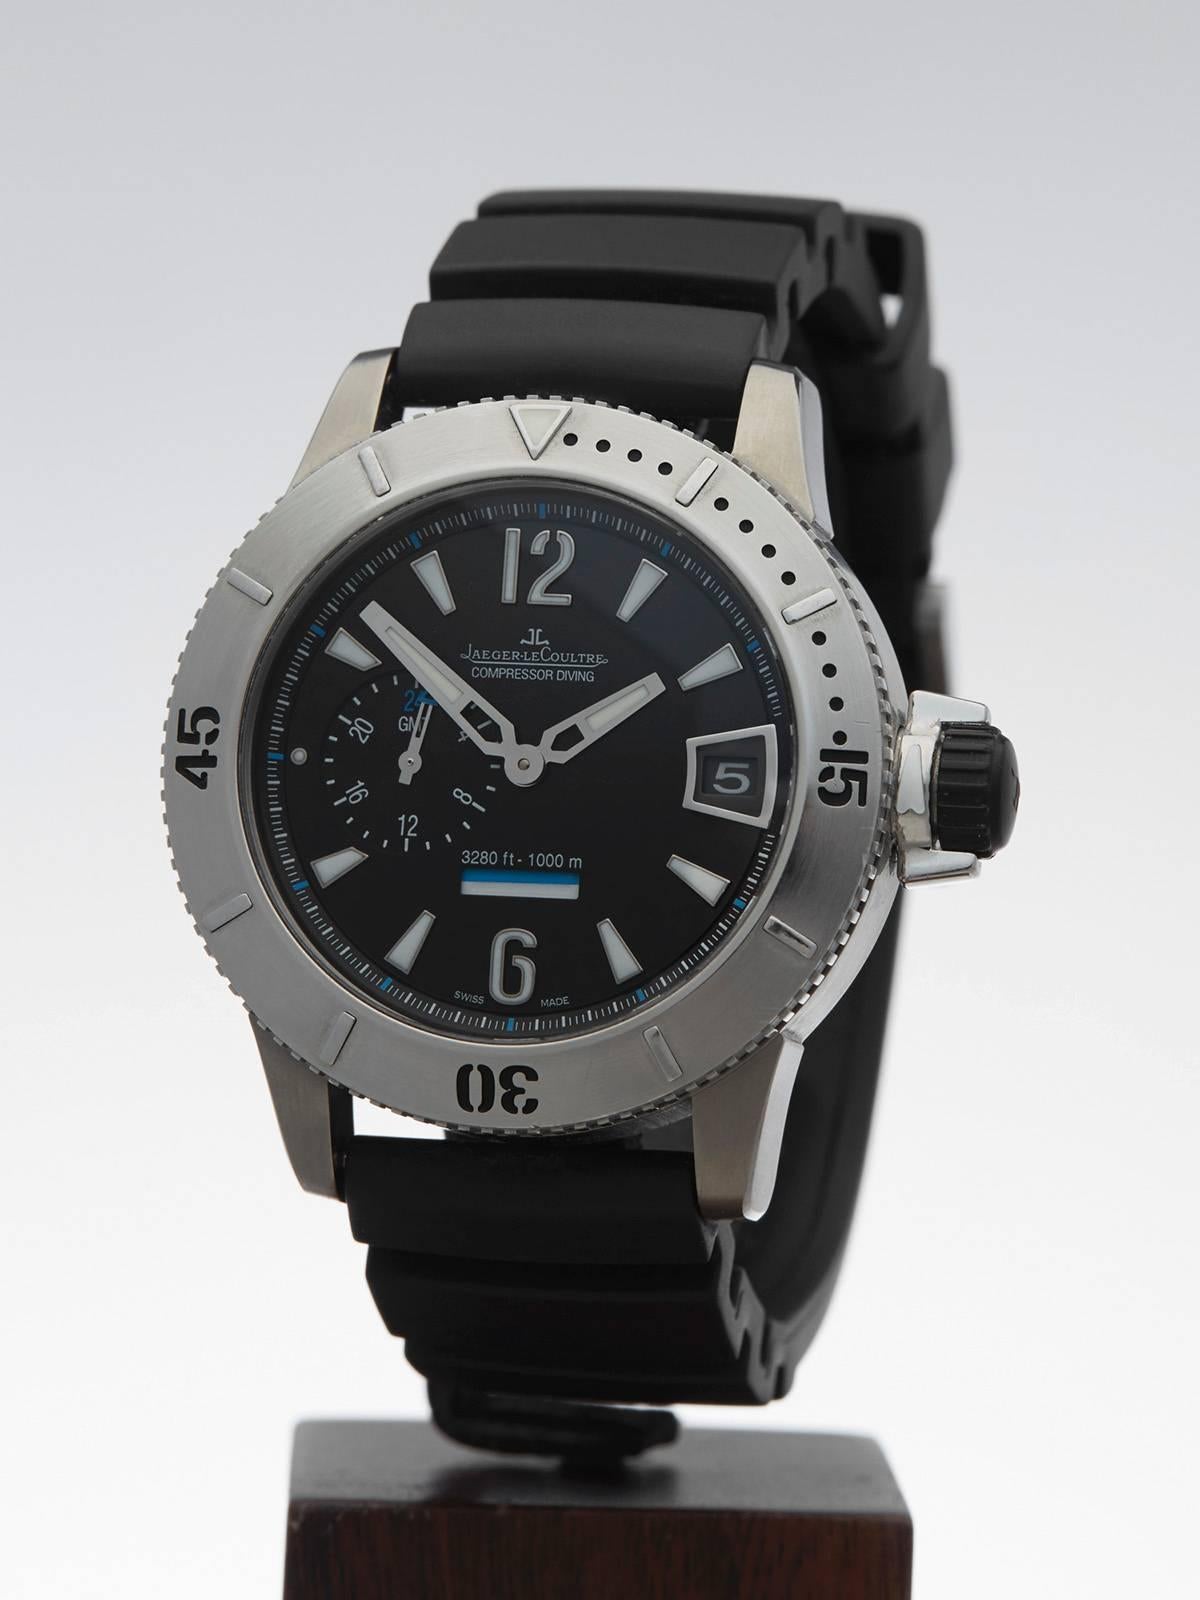 Men's Jaeger-LeCoultre Master Compressor diving gmt limited /1500 gents 160.T.05 watch